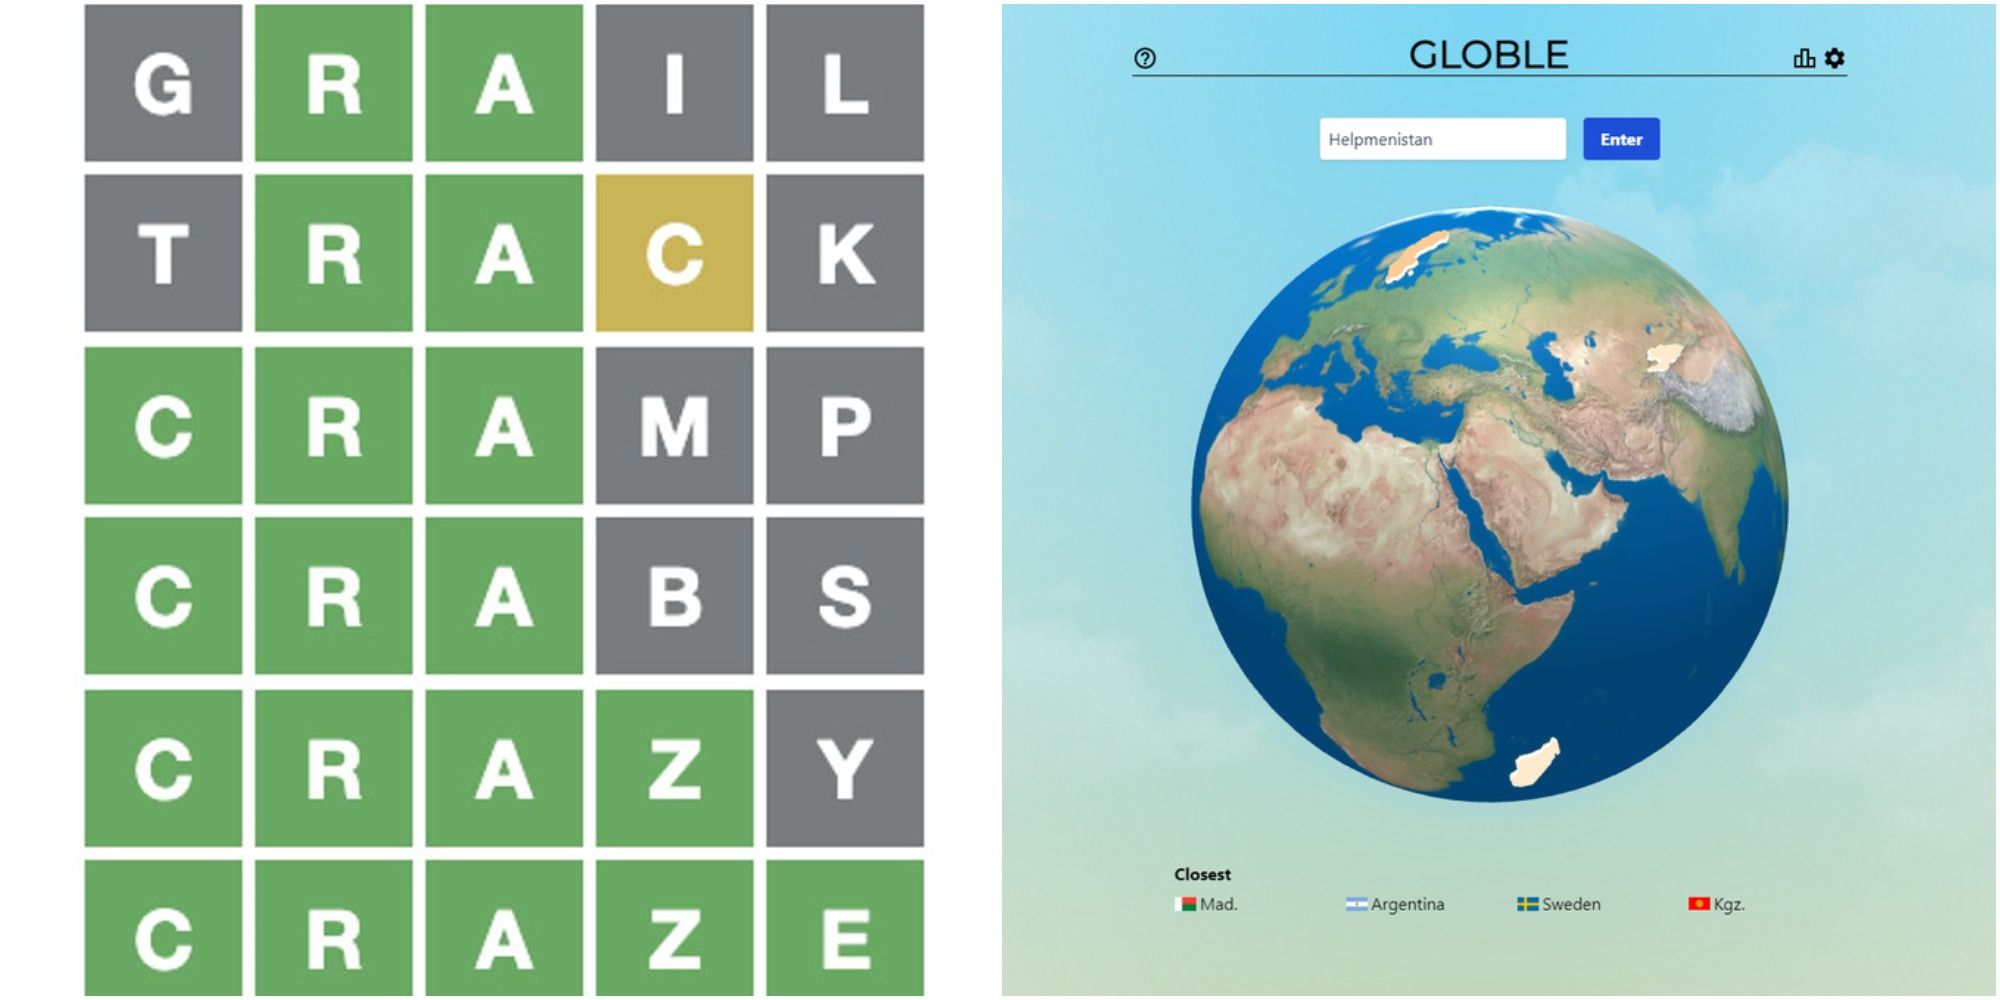 Worldle: The world geography version of the Wordle puzzle drawing a million  map lovers a day